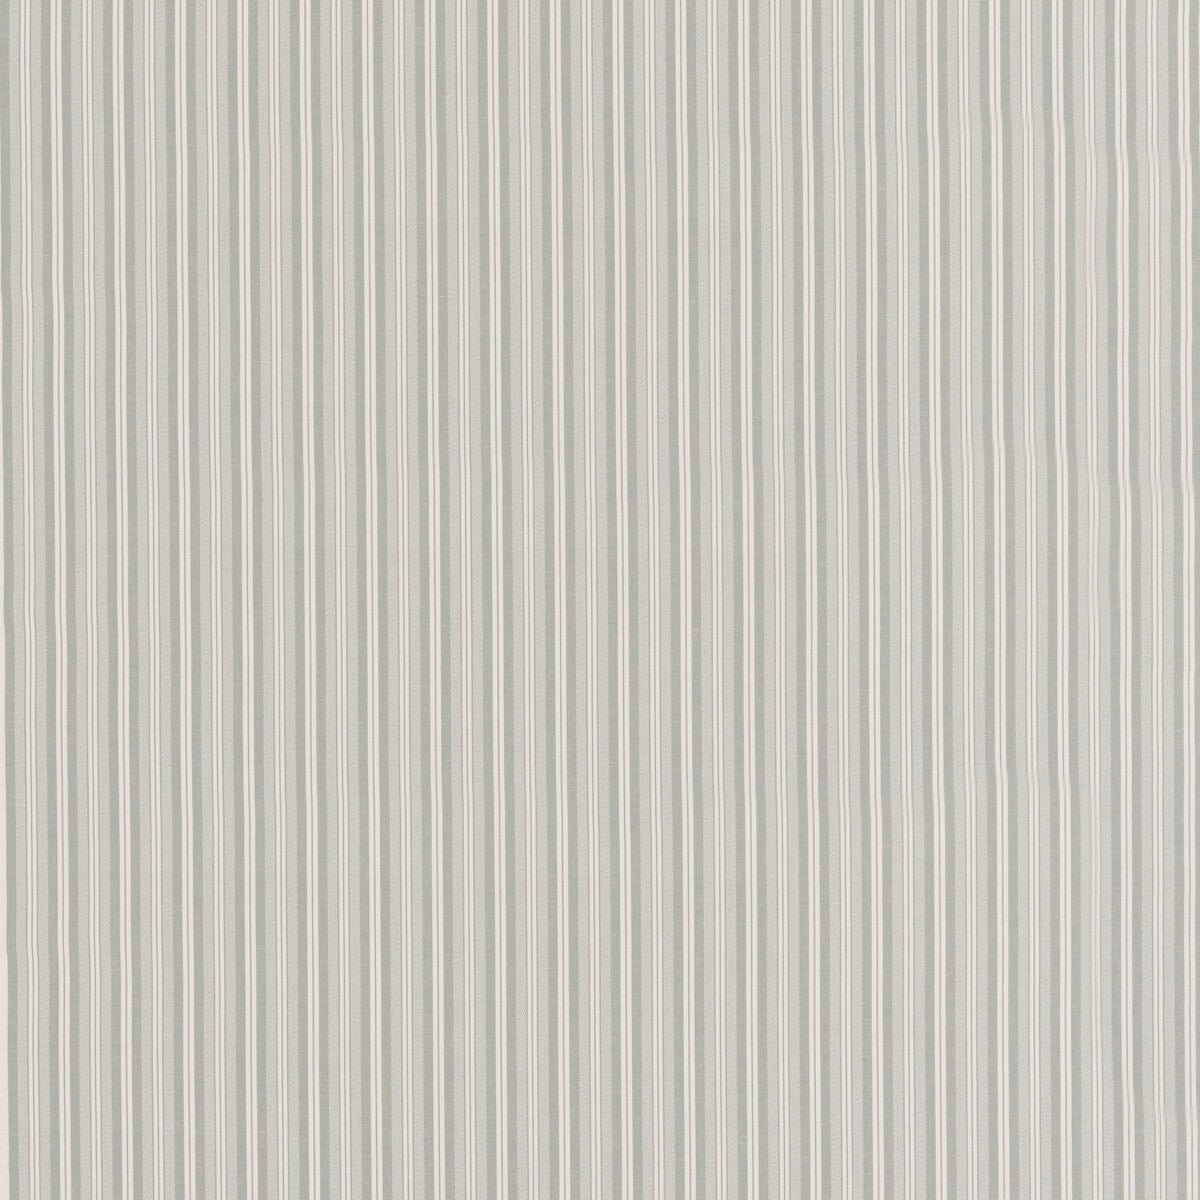 Laverton Stripe fabric in aqua color - pattern BF11037.725.0 - by G P &amp; J Baker in the Baker House Plain &amp; Stripe II collection